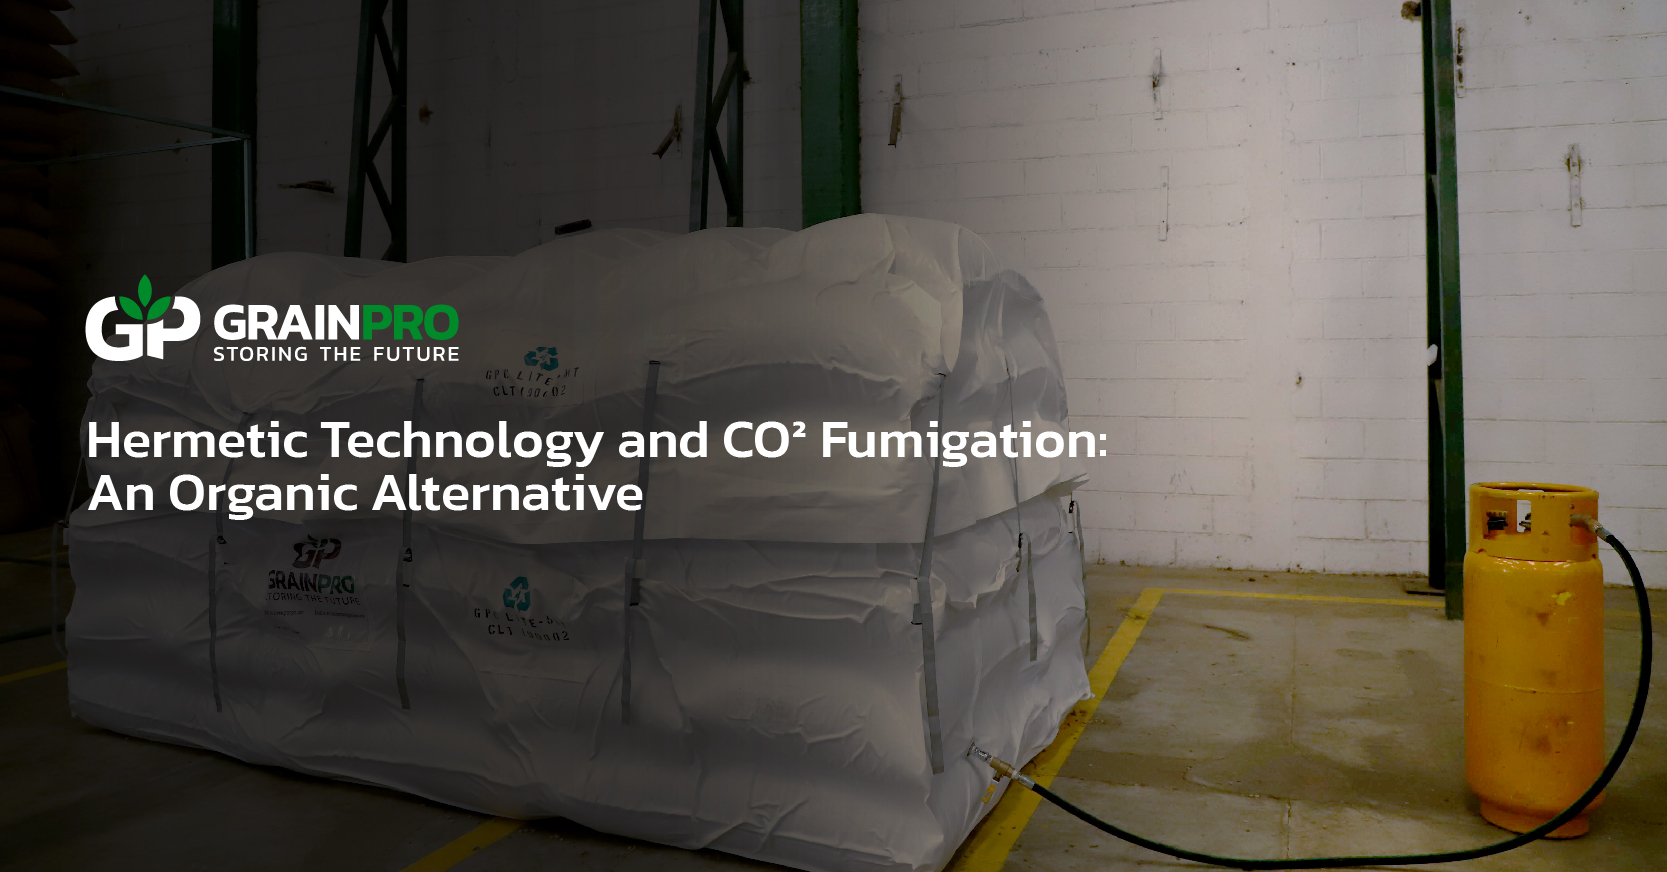 Hermetic Technology and CO2 Fumigation